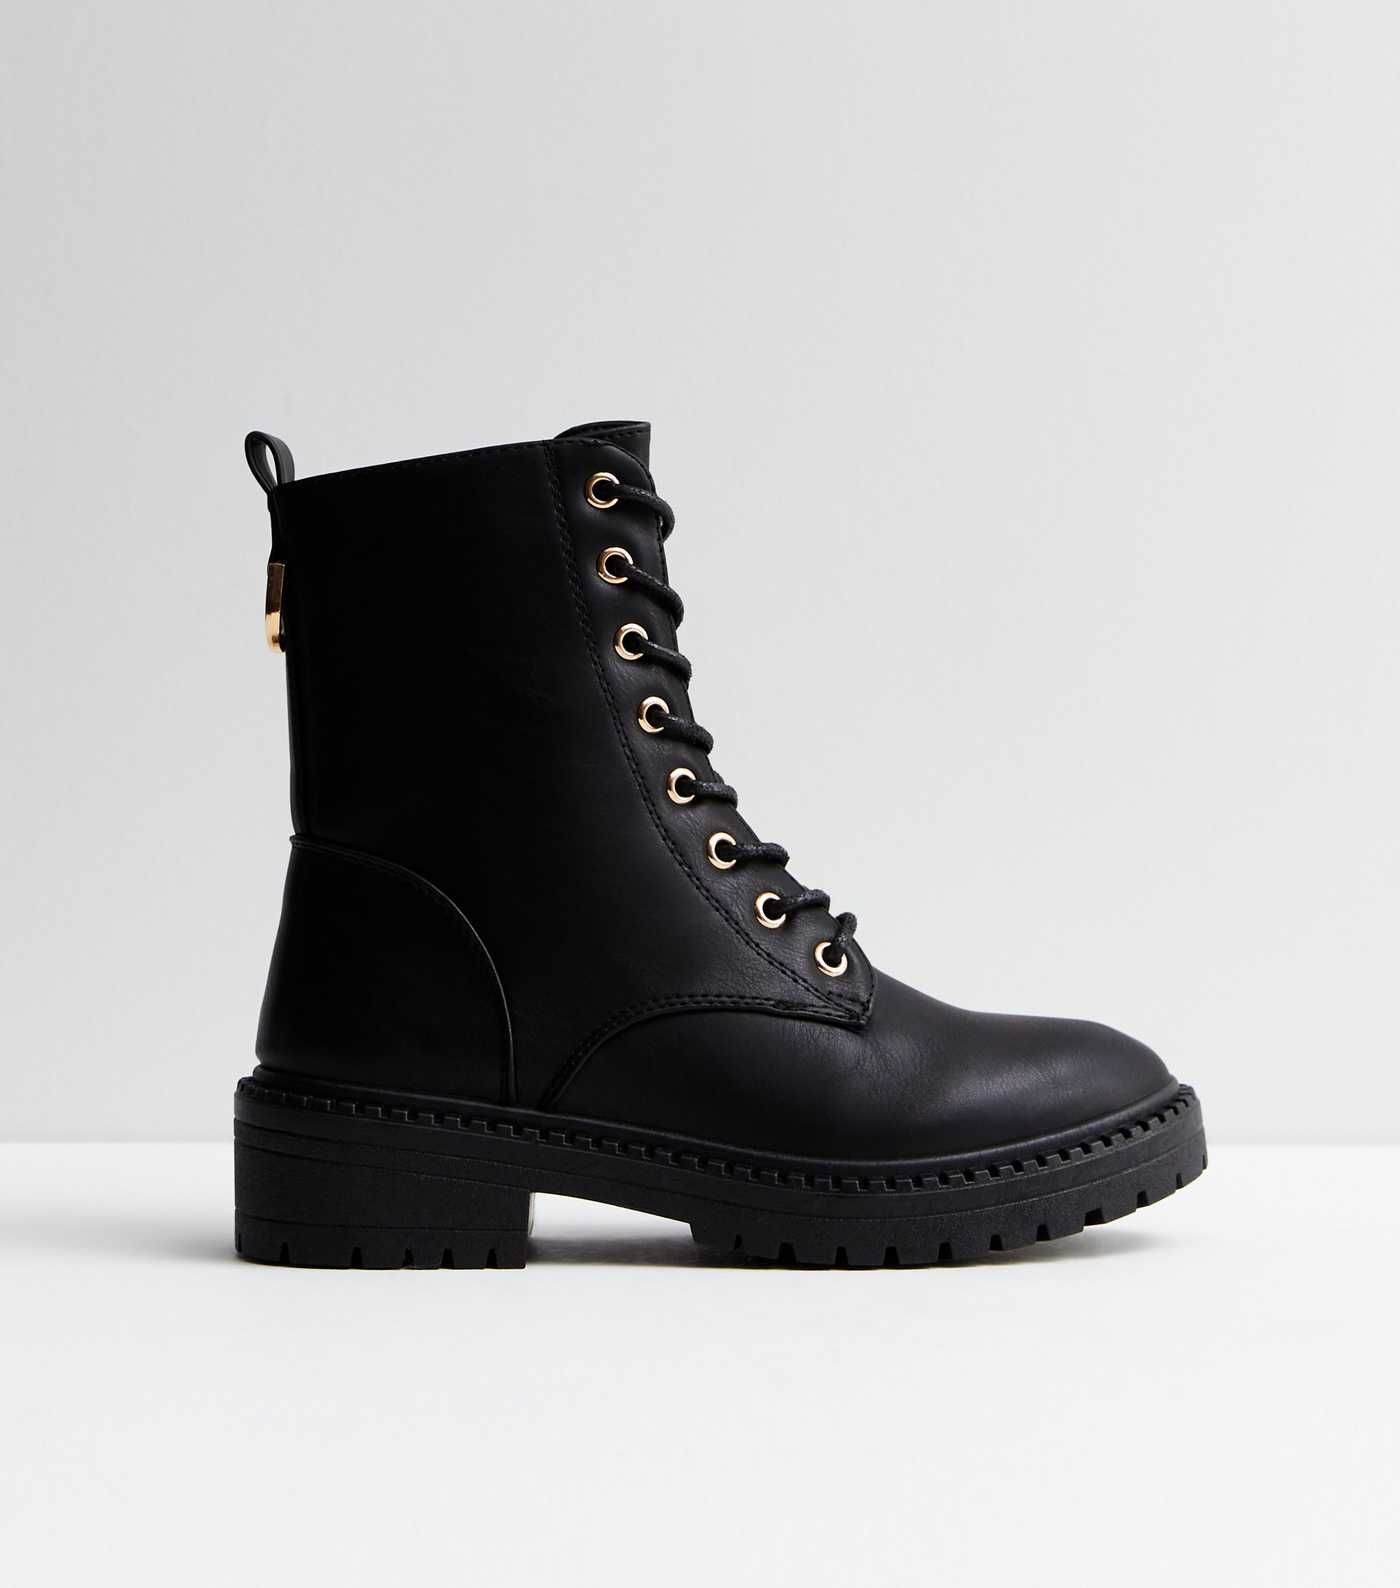 Black Leather-Look Lace Up Biker Boots
						
						Add to Saved Items
						Remove from Saved It... | New Look (UK)